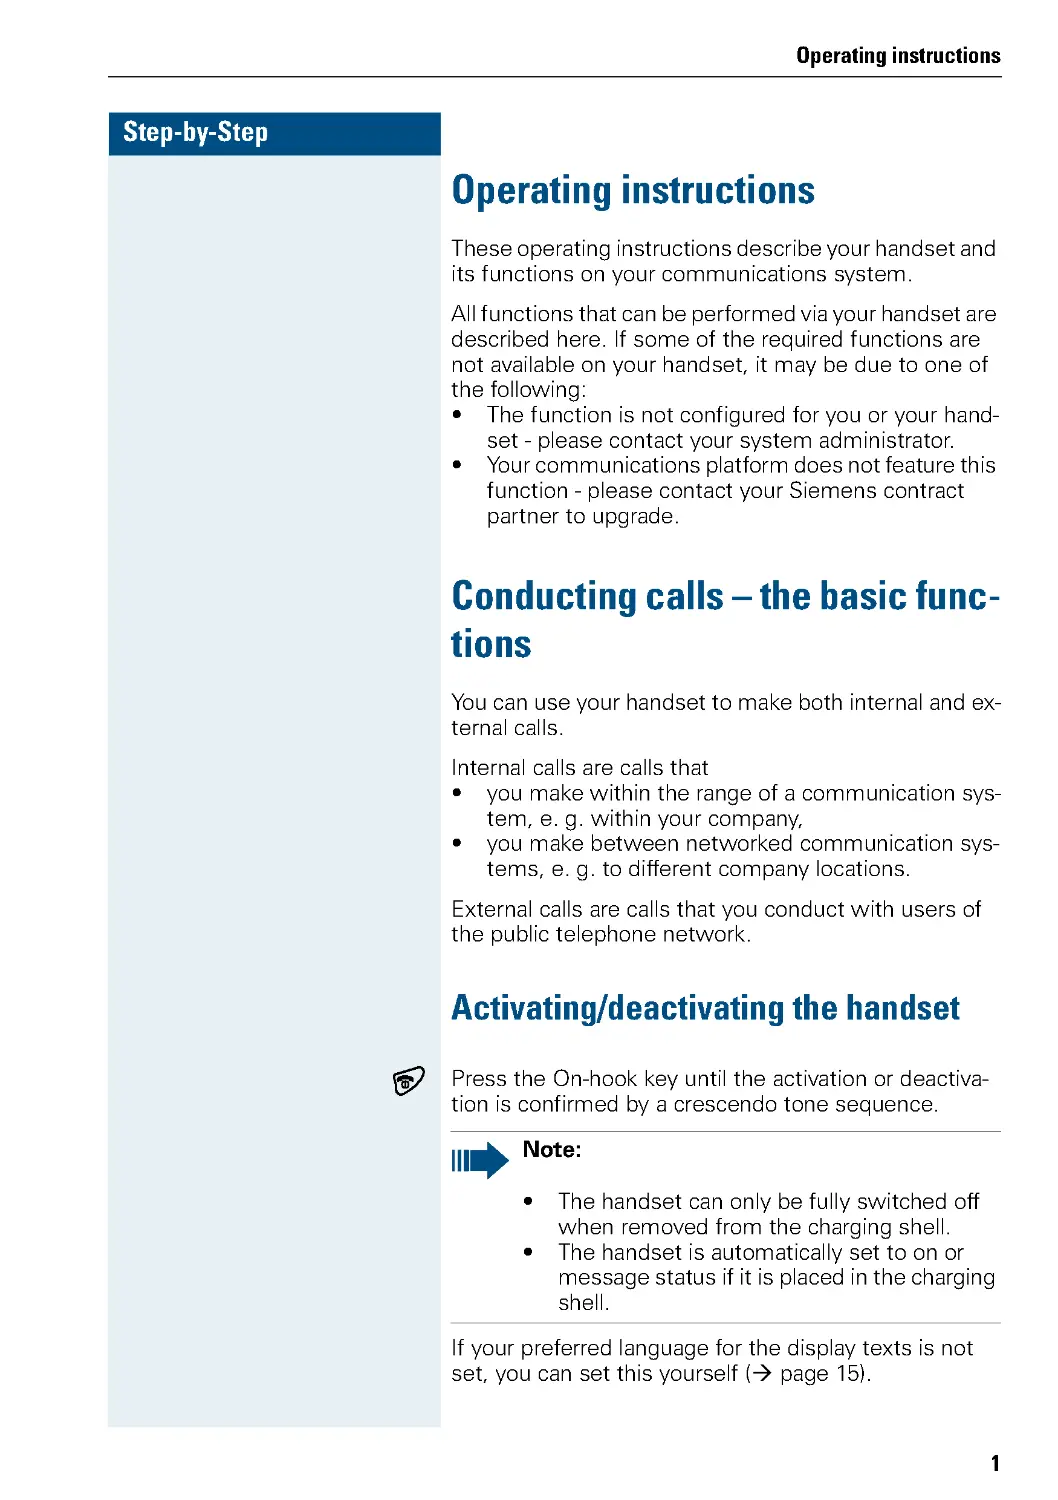 Operating instructions
Conducting calls – the basic functions